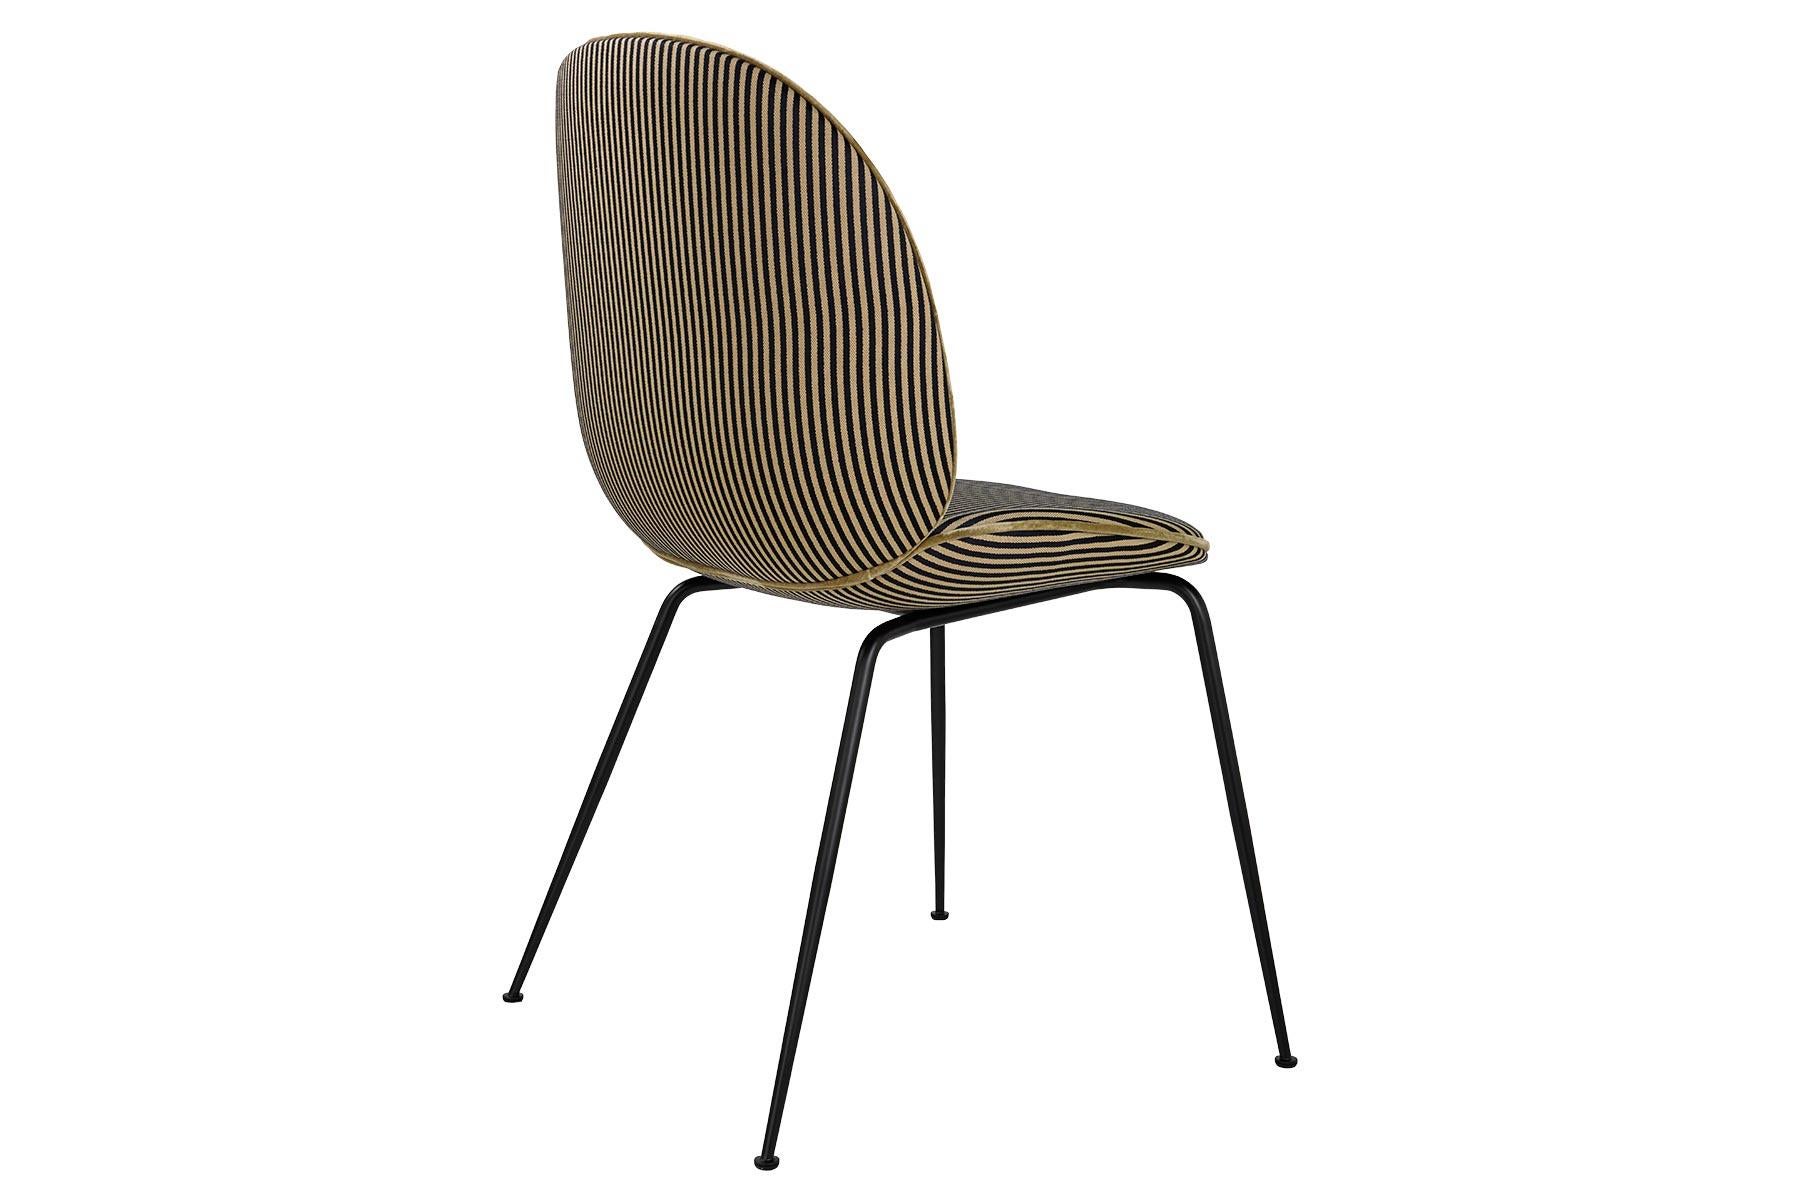 The Beetle chair has since its introduction in 2013 being well received by end-consumers as well as interior architects. Due to its appealing design, outstanding comfort and unique customization possibilities, the chair can be seen in many of the